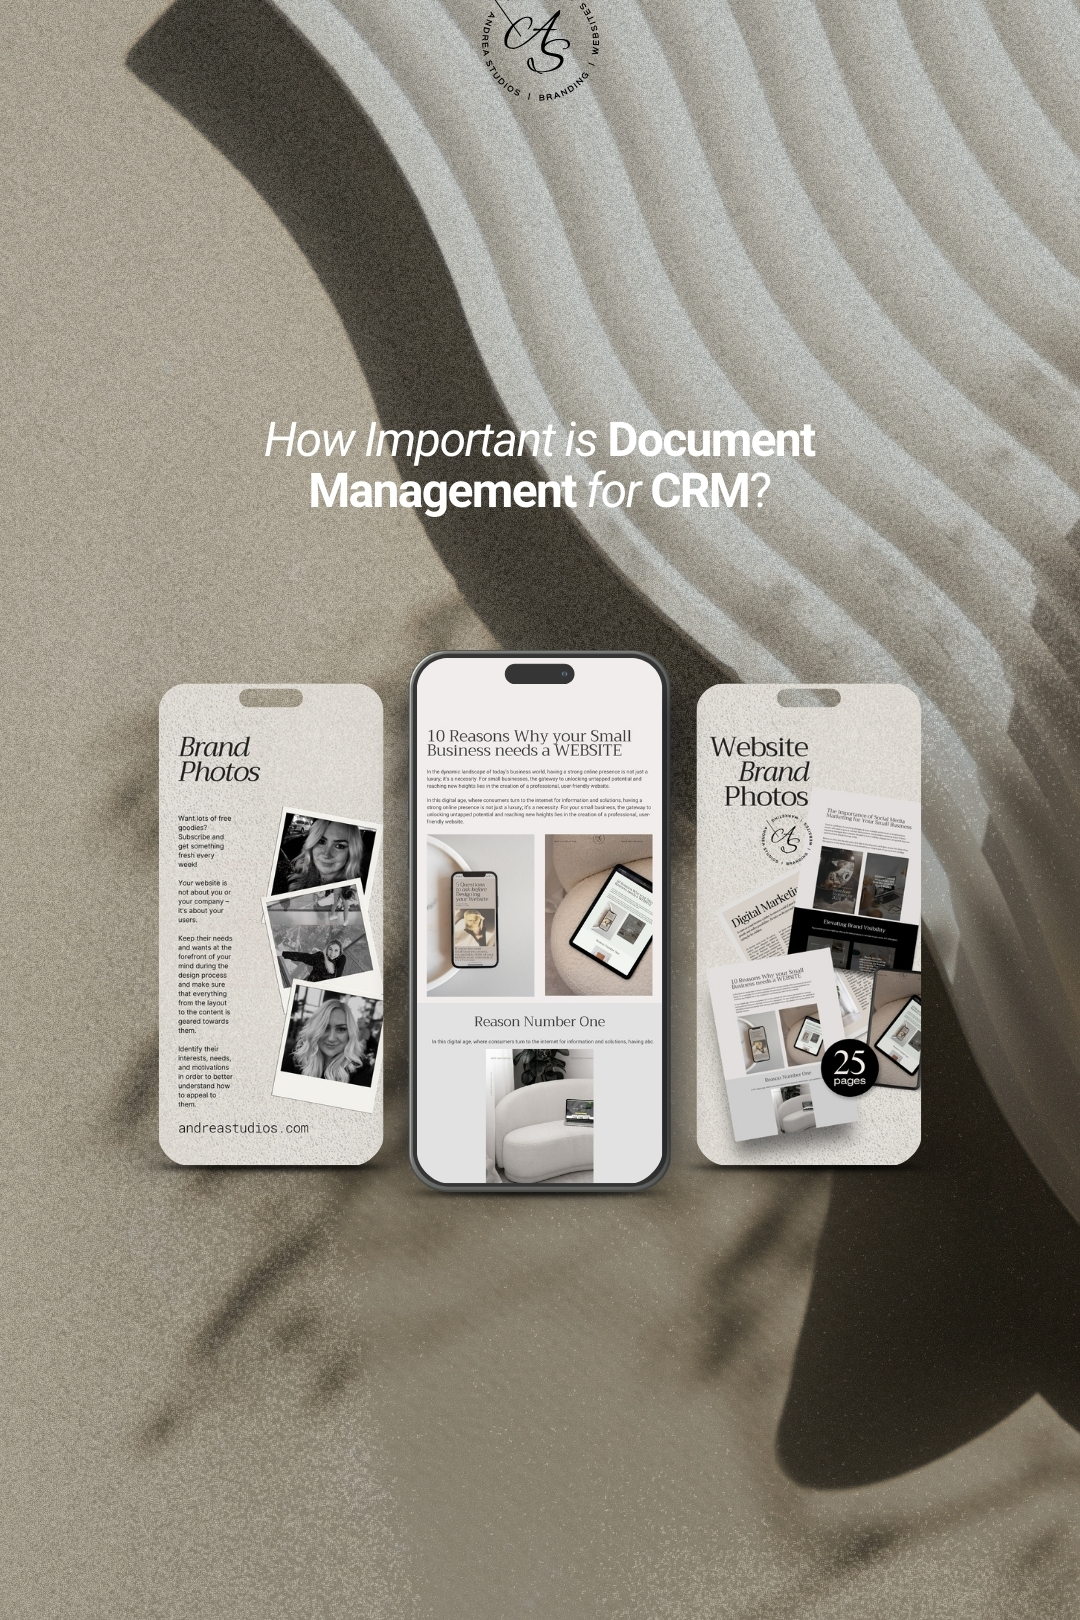 How Important Is Document Management for CRM?